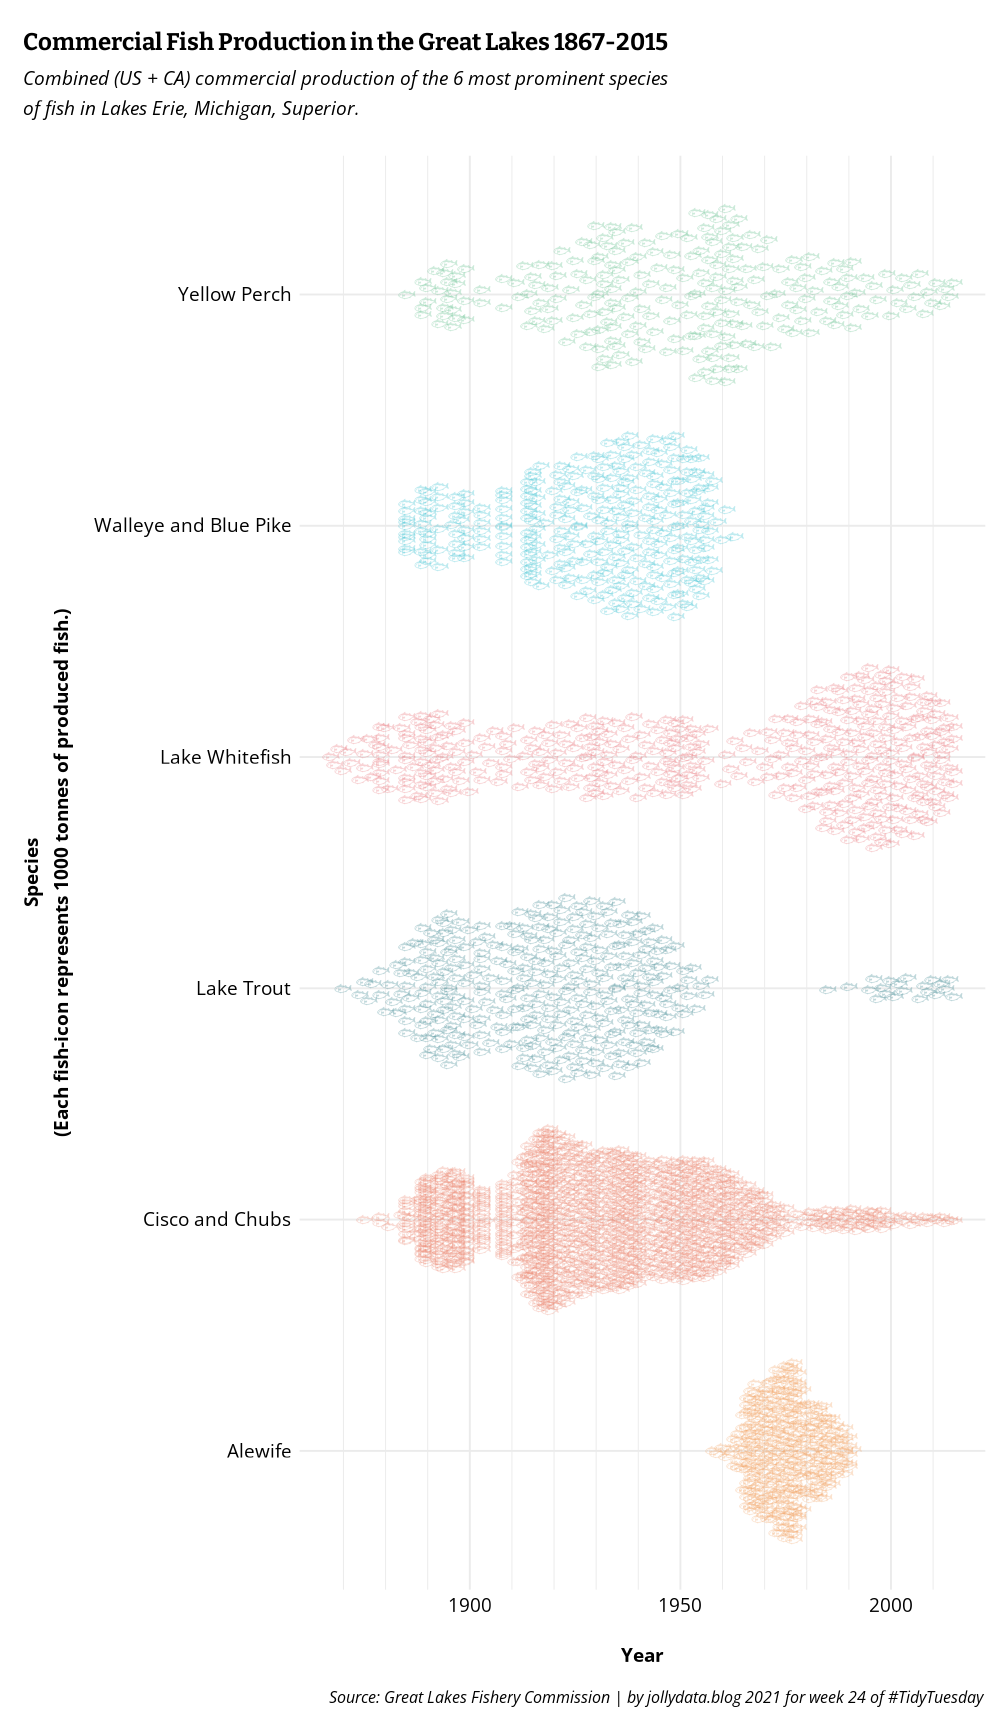 Beeswarm plot showing the amount of commercial production of 6 fish species in the Great Lakes from 1867 to 2015. The rather experimental implementation of horizontal beeswarm plots depicts fish-icons as points within the swarm, each icon representing 1000 tonnes of produced fish. Accordingly, in years of high production the beeswarm is thicker and shows more icons.